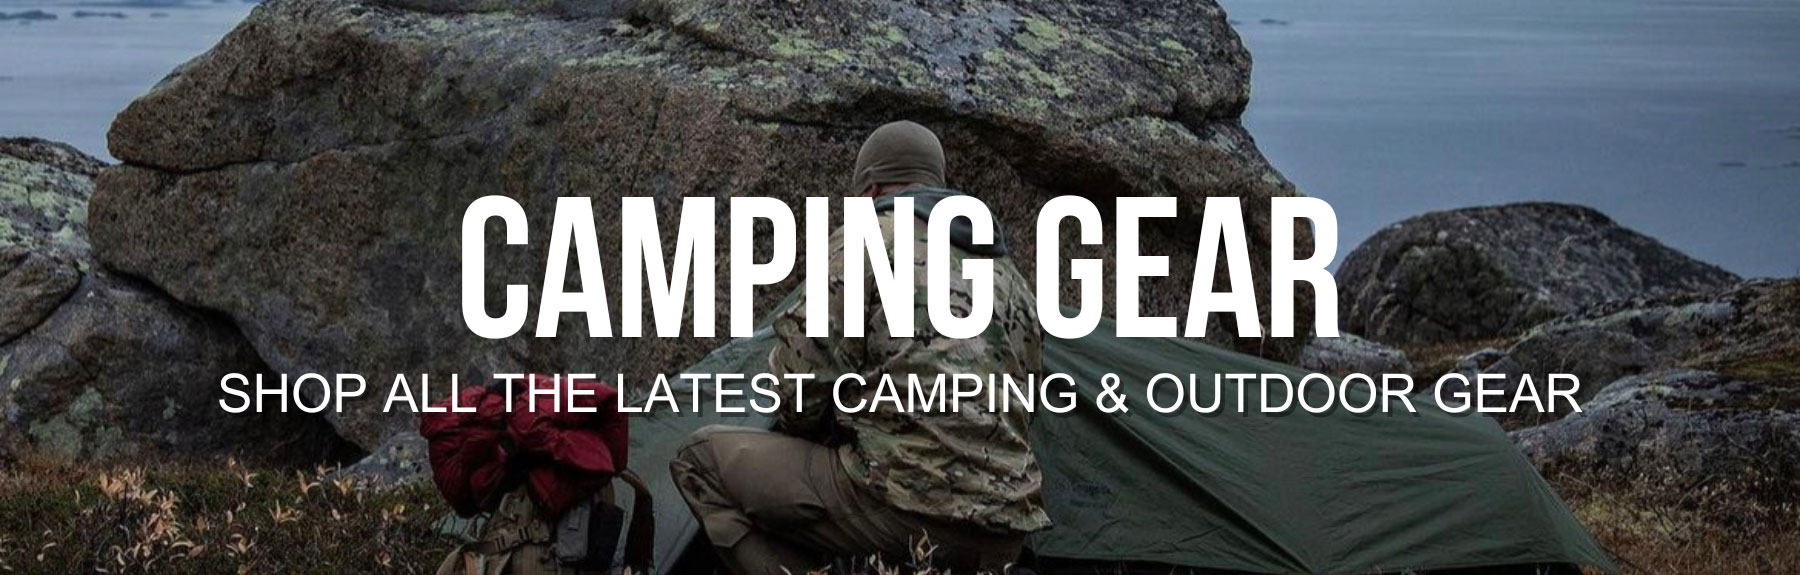 Camping Top Website Banner 1800 × 575 | Extreme Outfitters | Outdoor & Camping Gear Store